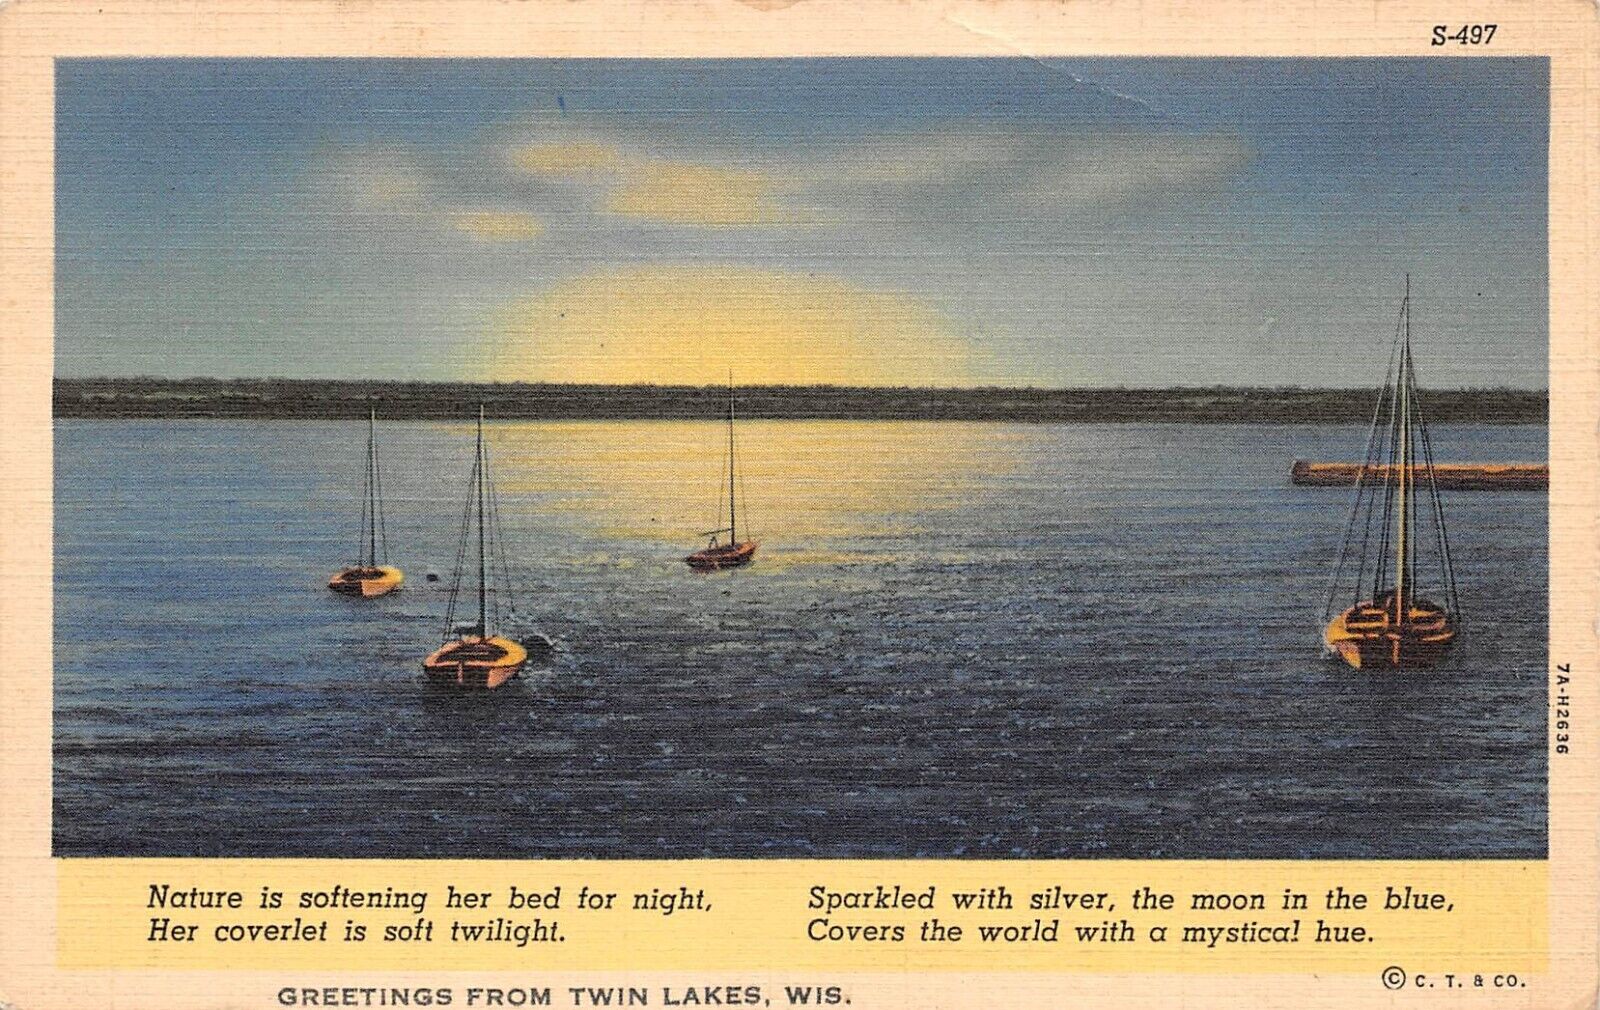 Greetings from Twin Lakes Wisconsin Sailboats at Sunset 1940 Linen Postcard